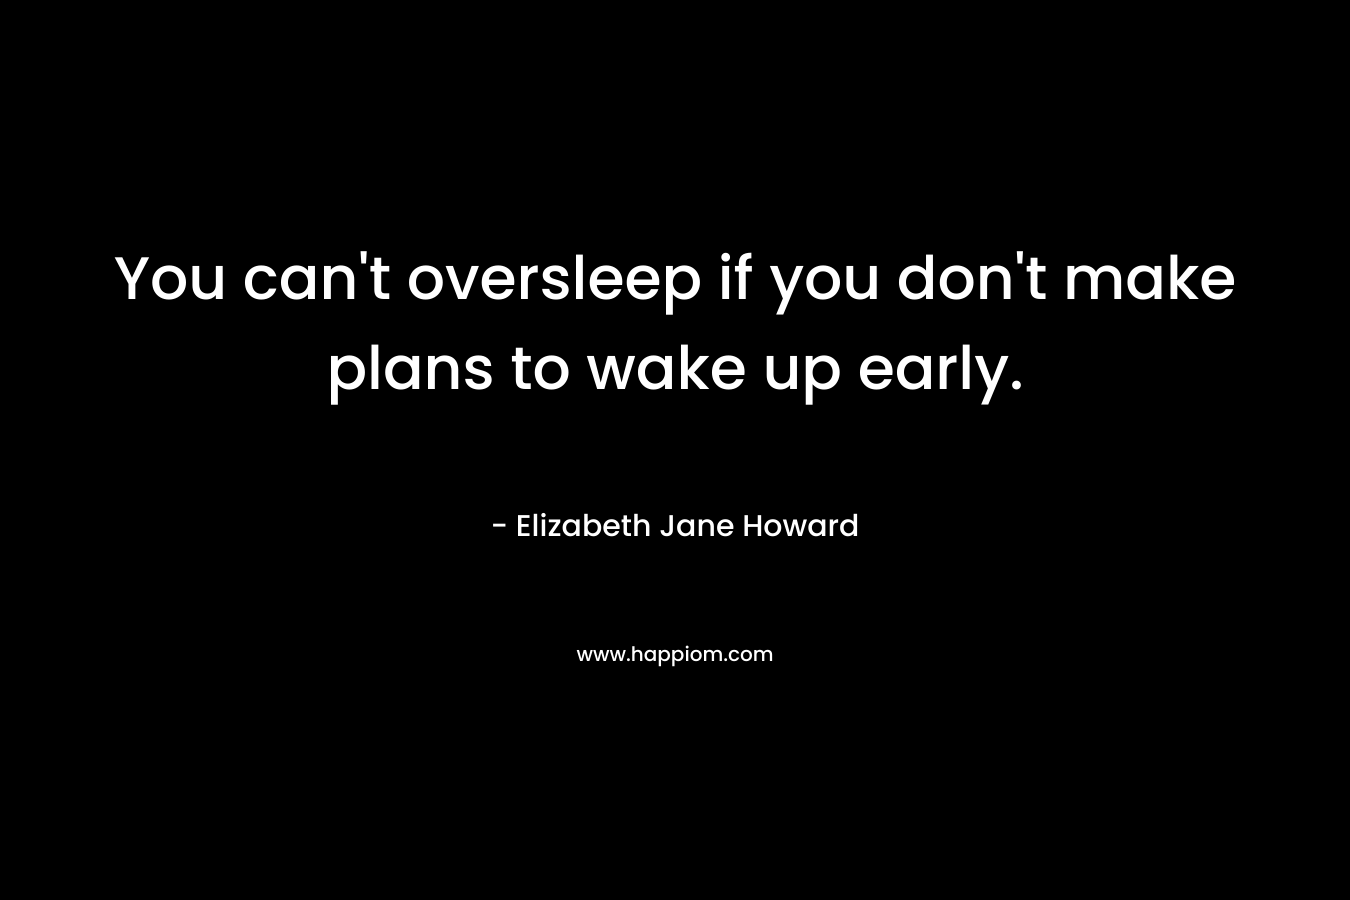 You can’t oversleep if you don’t make plans to wake up early. – Elizabeth Jane Howard